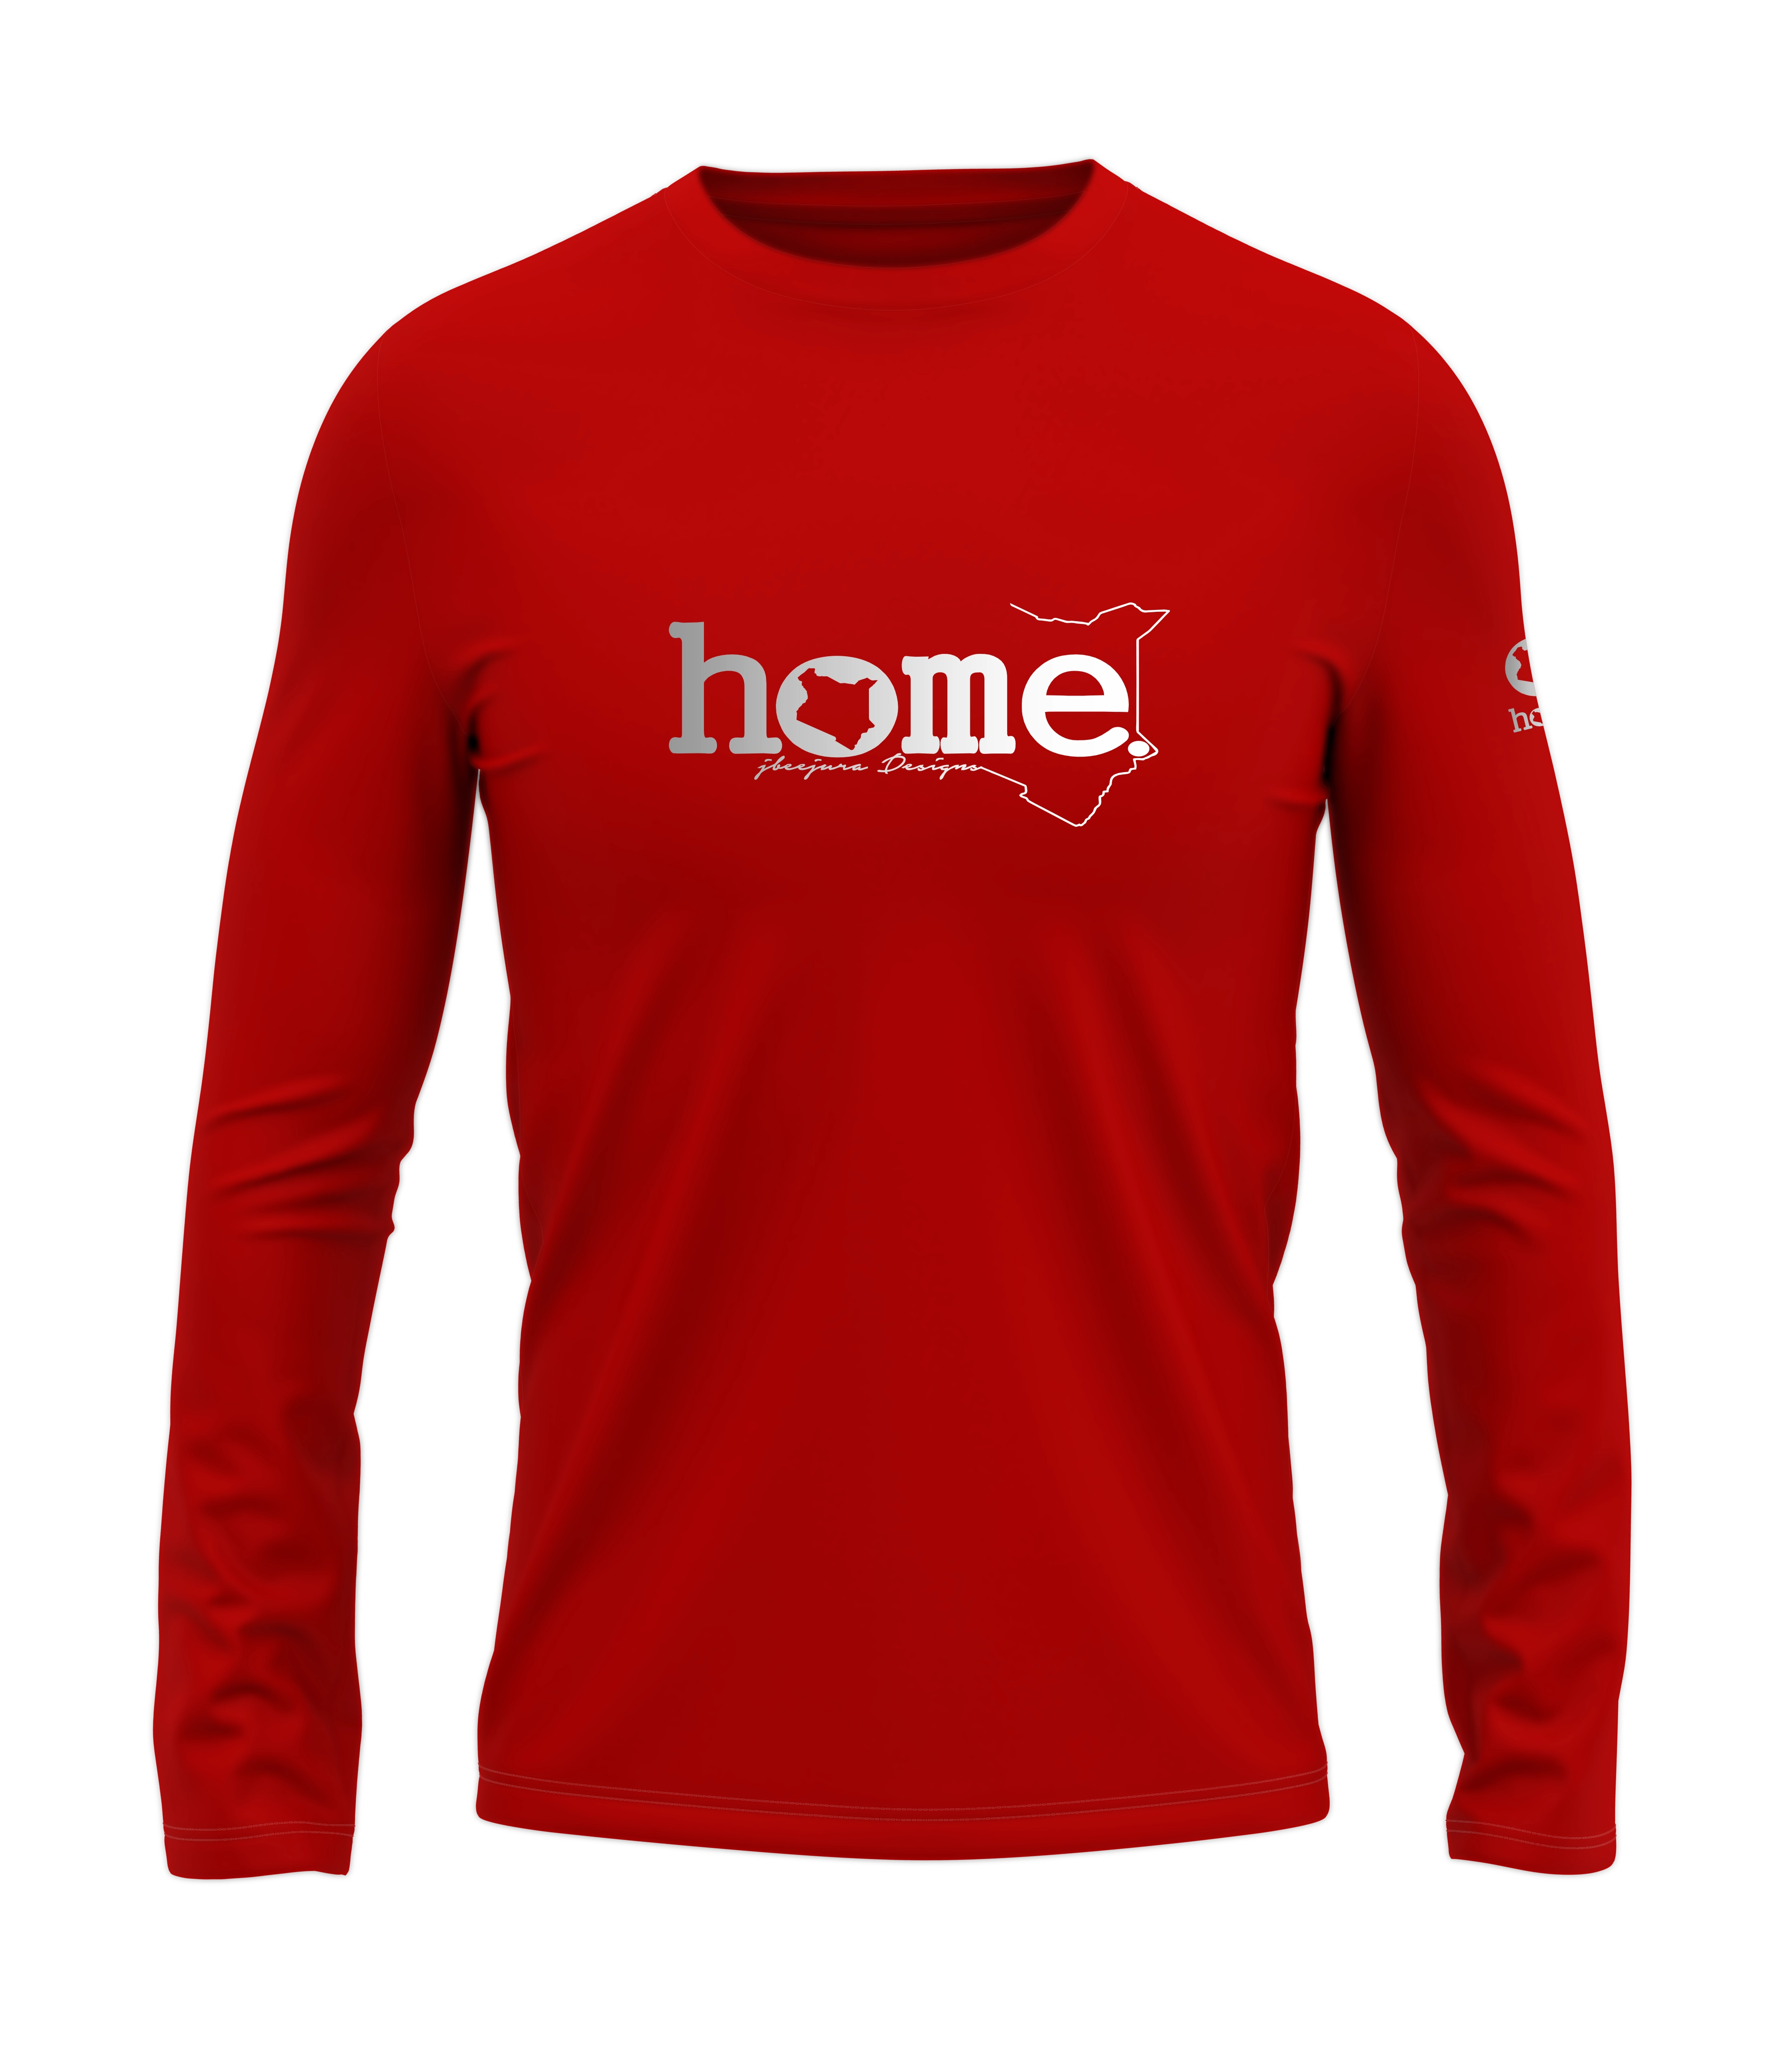 home_254 LONG-SLEEVED RED T-SHIRT WITH A SILVER CLASSIC WORDS PRINT – COTTON PLUS FABRIC